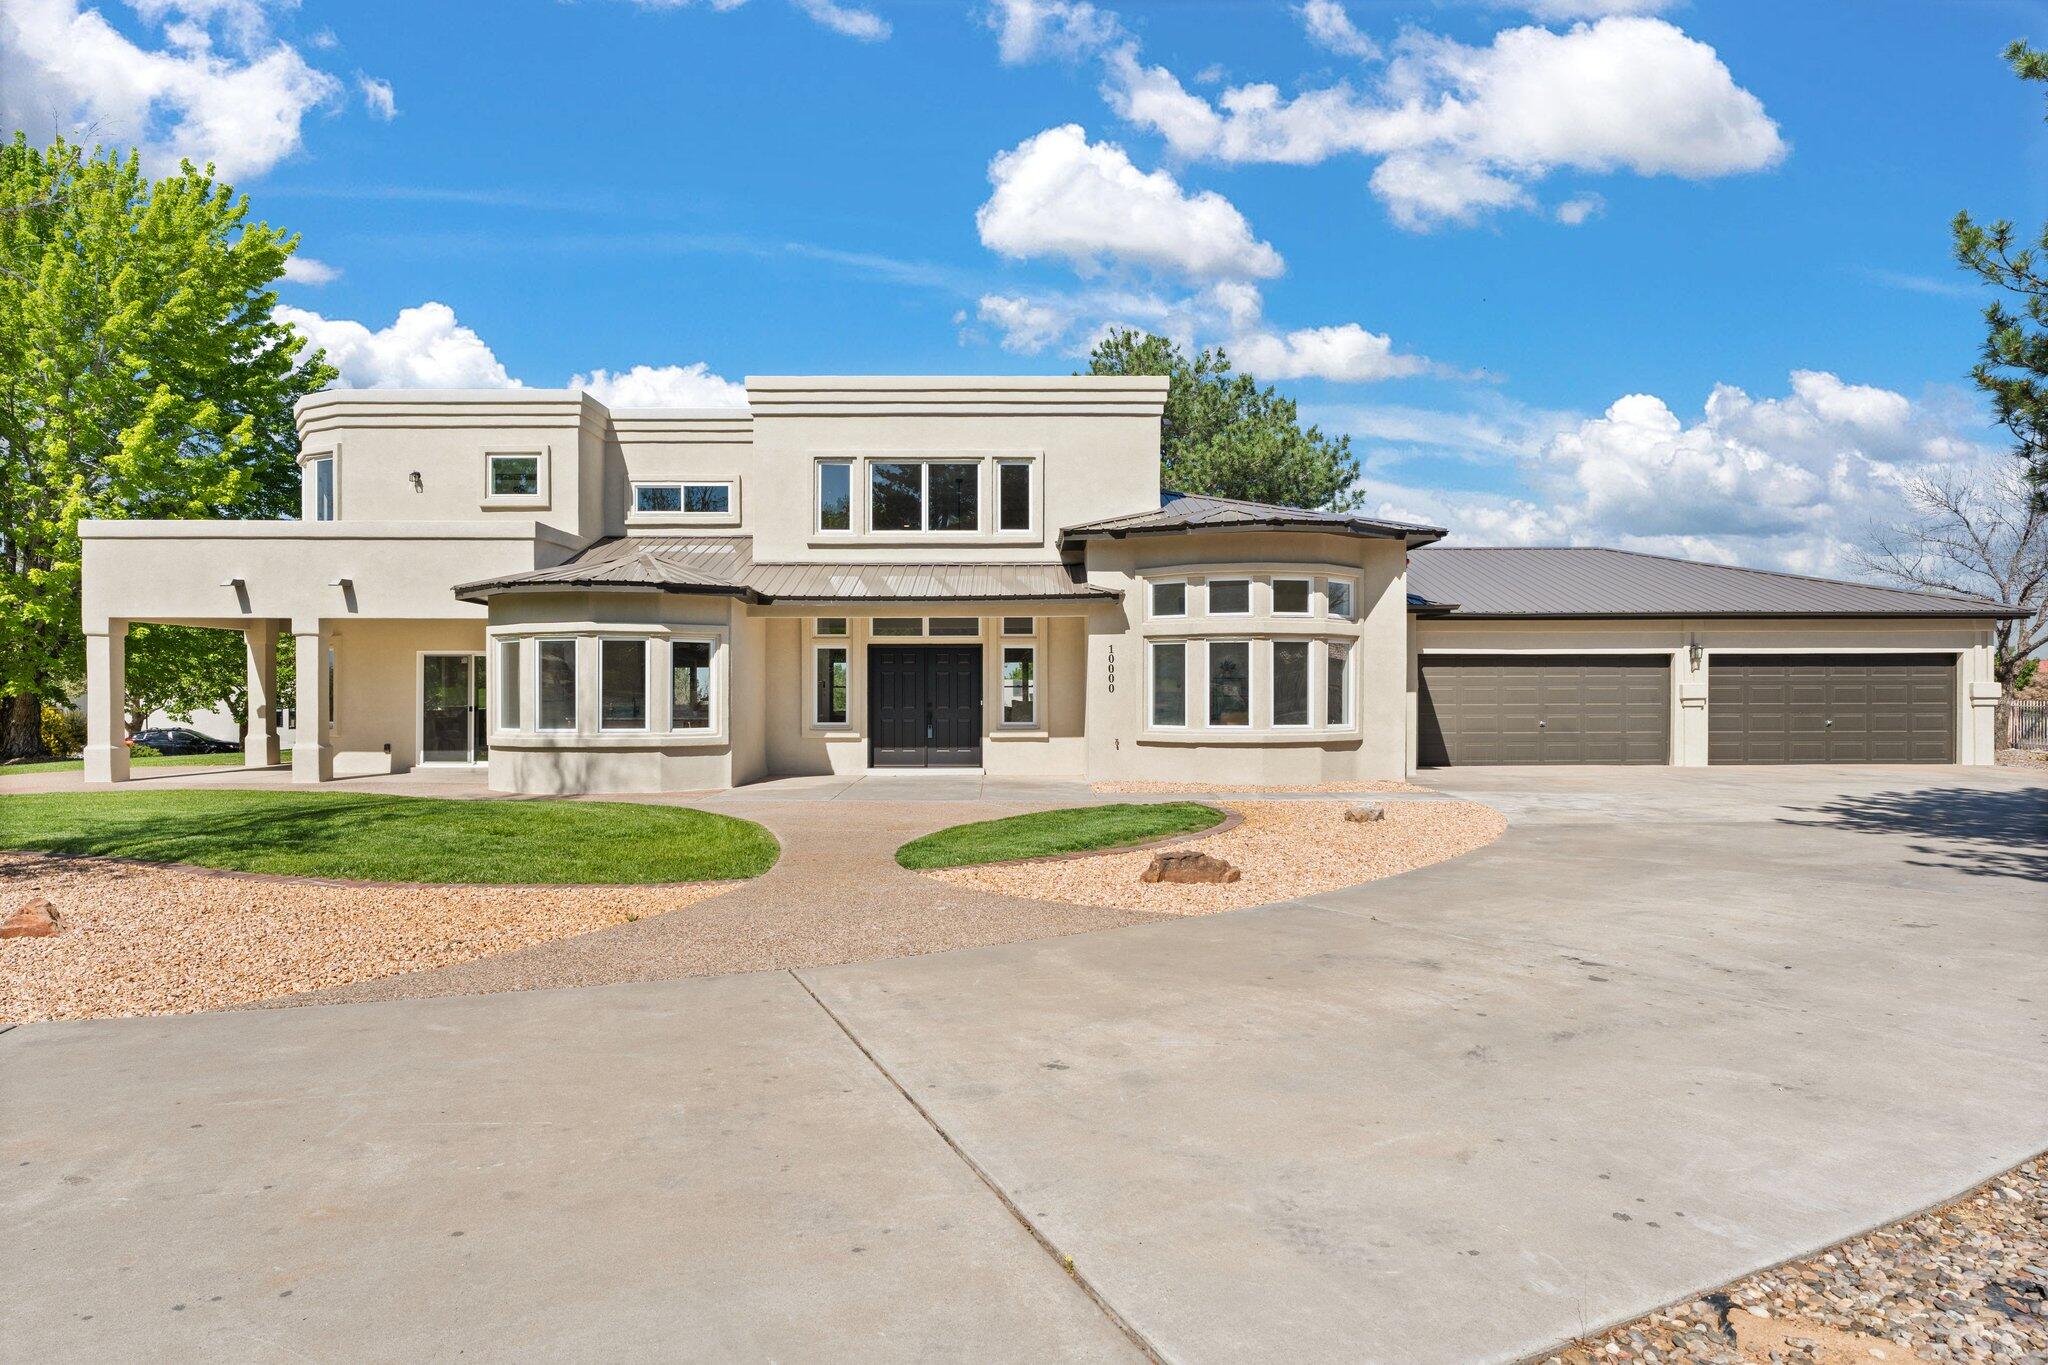 Impeccably redesigned custom beauty tucked away in a gated North Albuquerque Acres community! This expansive home boasts 4,720sf with 5 bedrooms, 3.5 bathrooms, 2 living areas, a loft and 4 car garage! Sleek and modern front living area greets you with upgraded floors and a soaring ceiling. Kitchen with designer cabinetry, honed granite countertops, built-in double oven, microwave, gas cooktop, range hood, fridge, large island and breakfast nook. 1st floor in-laws suite with a private bath. Beautiful office space with a wall of windows. Upstairs find the loft sitting area. Luxurious owners suite with a wet bar, sitting area, balcony and spa like bath. Bath hosts his/hers sinks, a dressing area, free standing tub, walk-in shower and closet. Yard lined with mature trees!